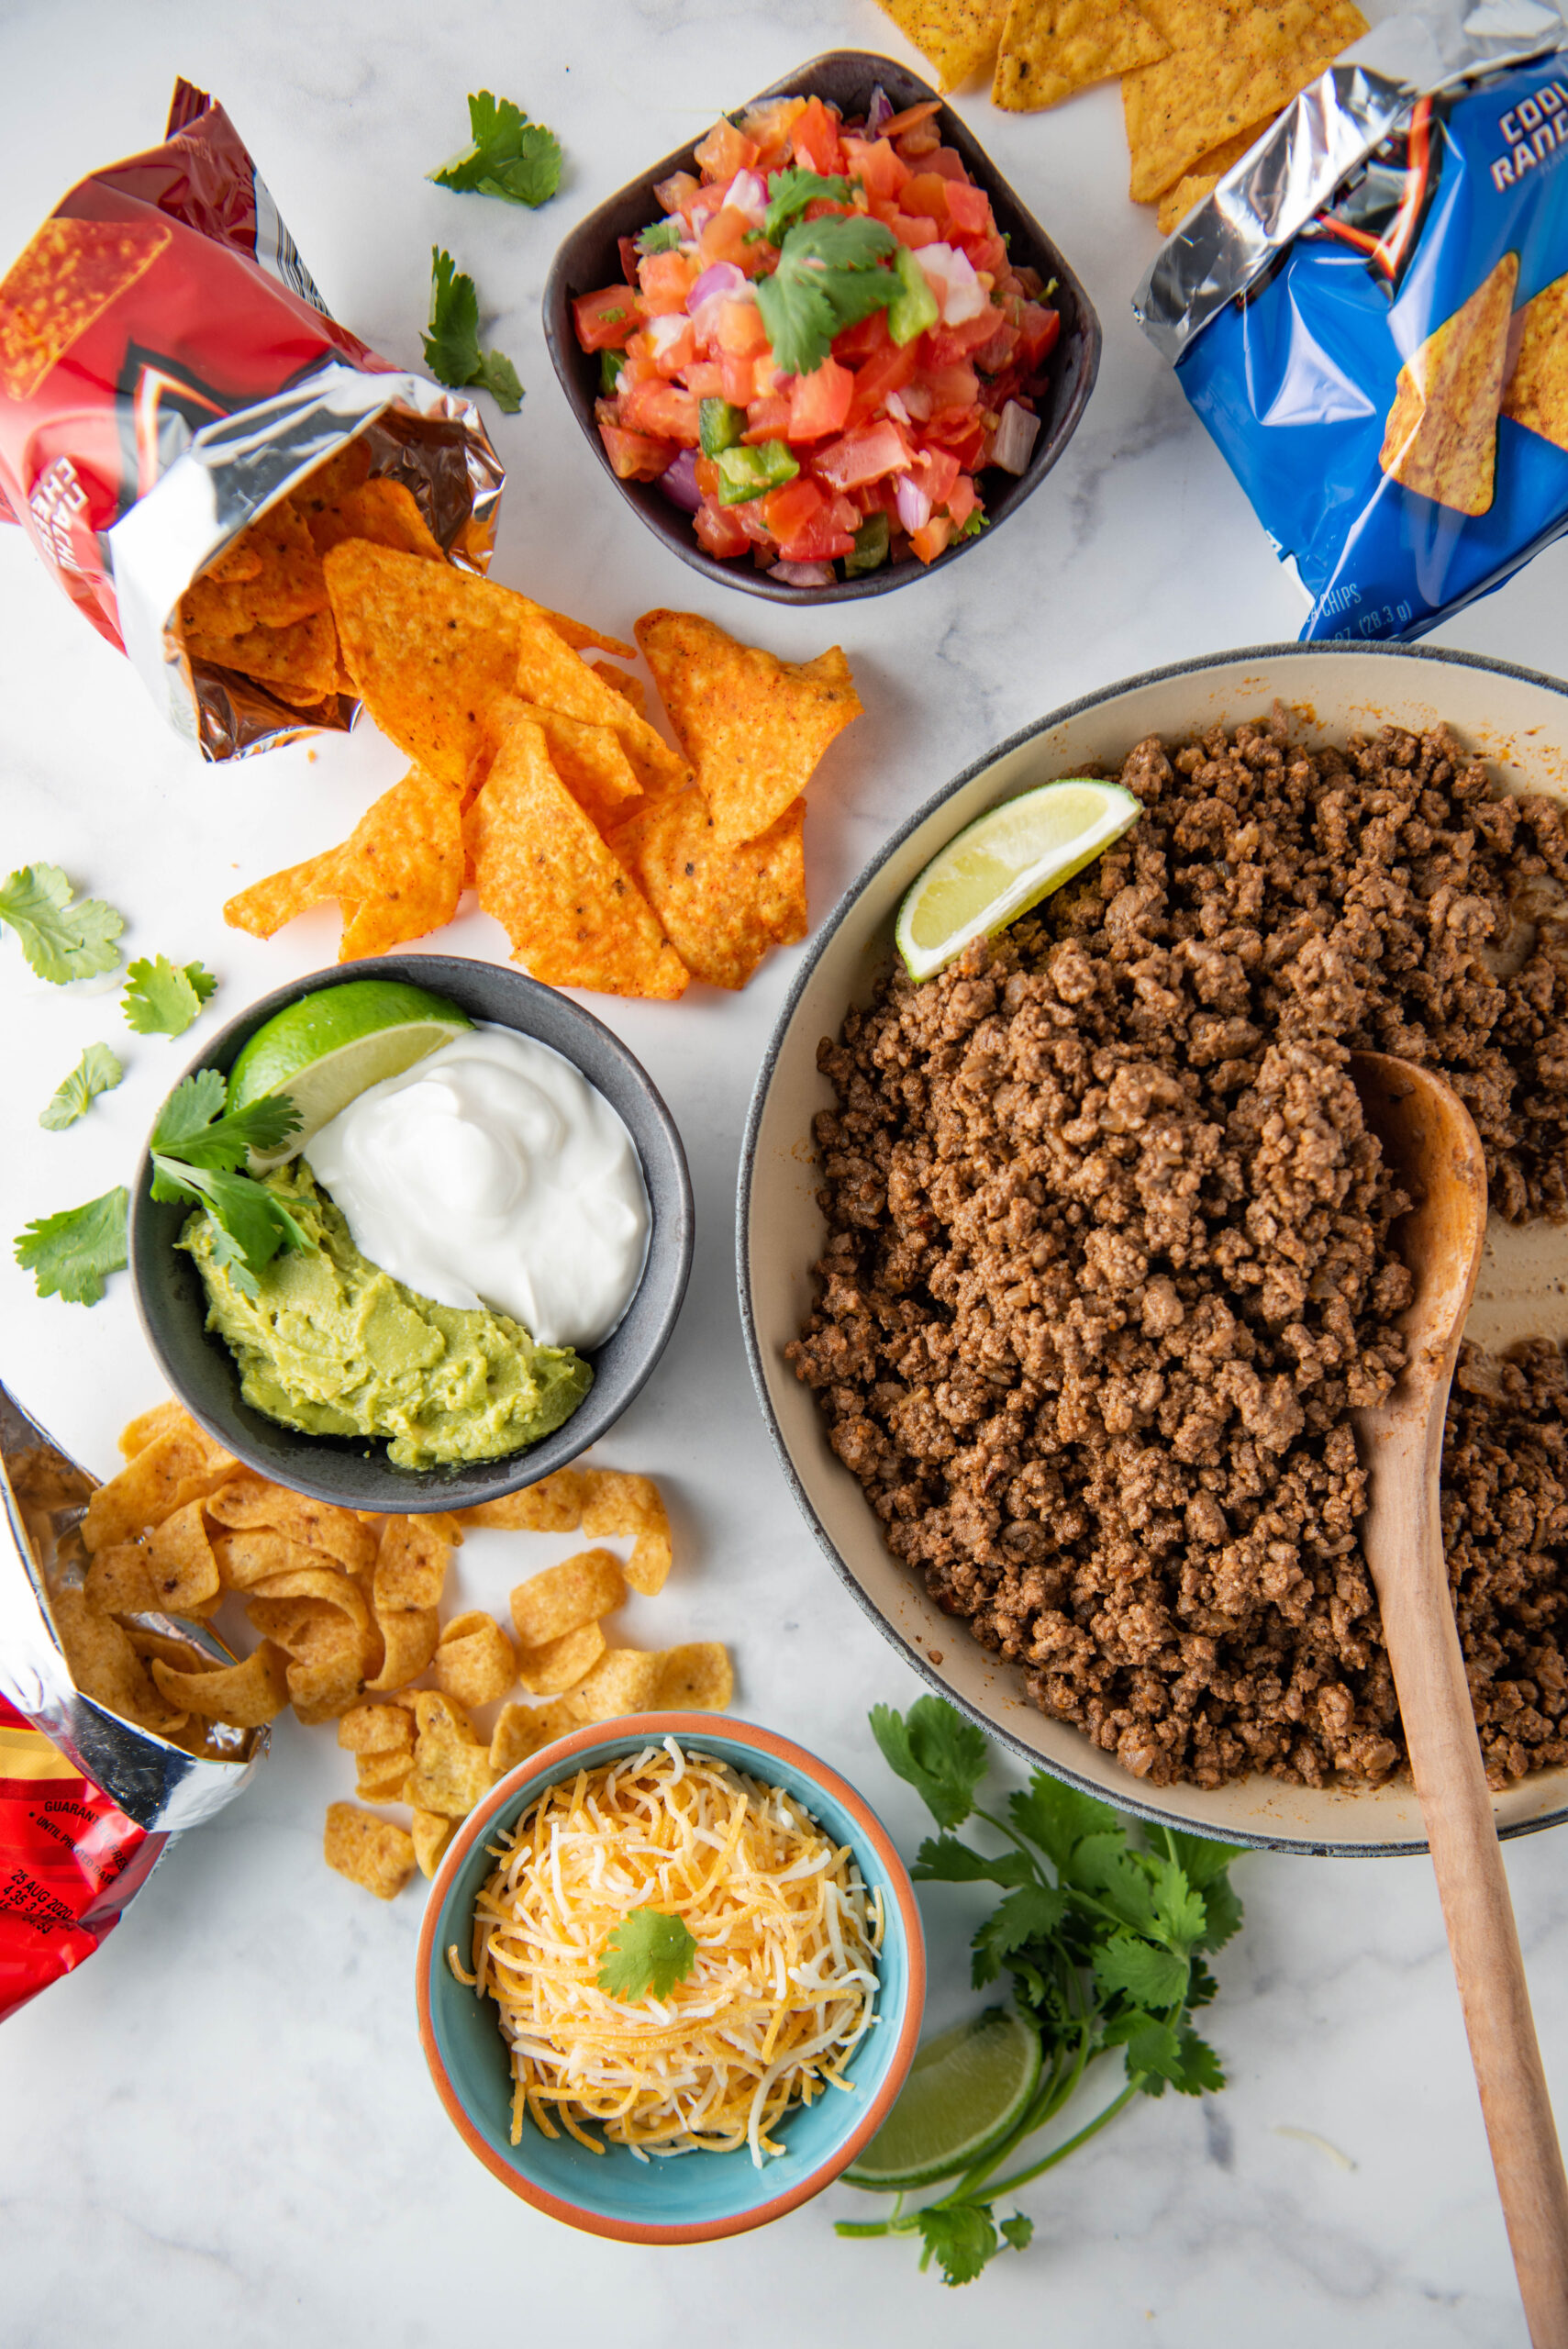 All ingredients for walking tacos are spread out on a white table